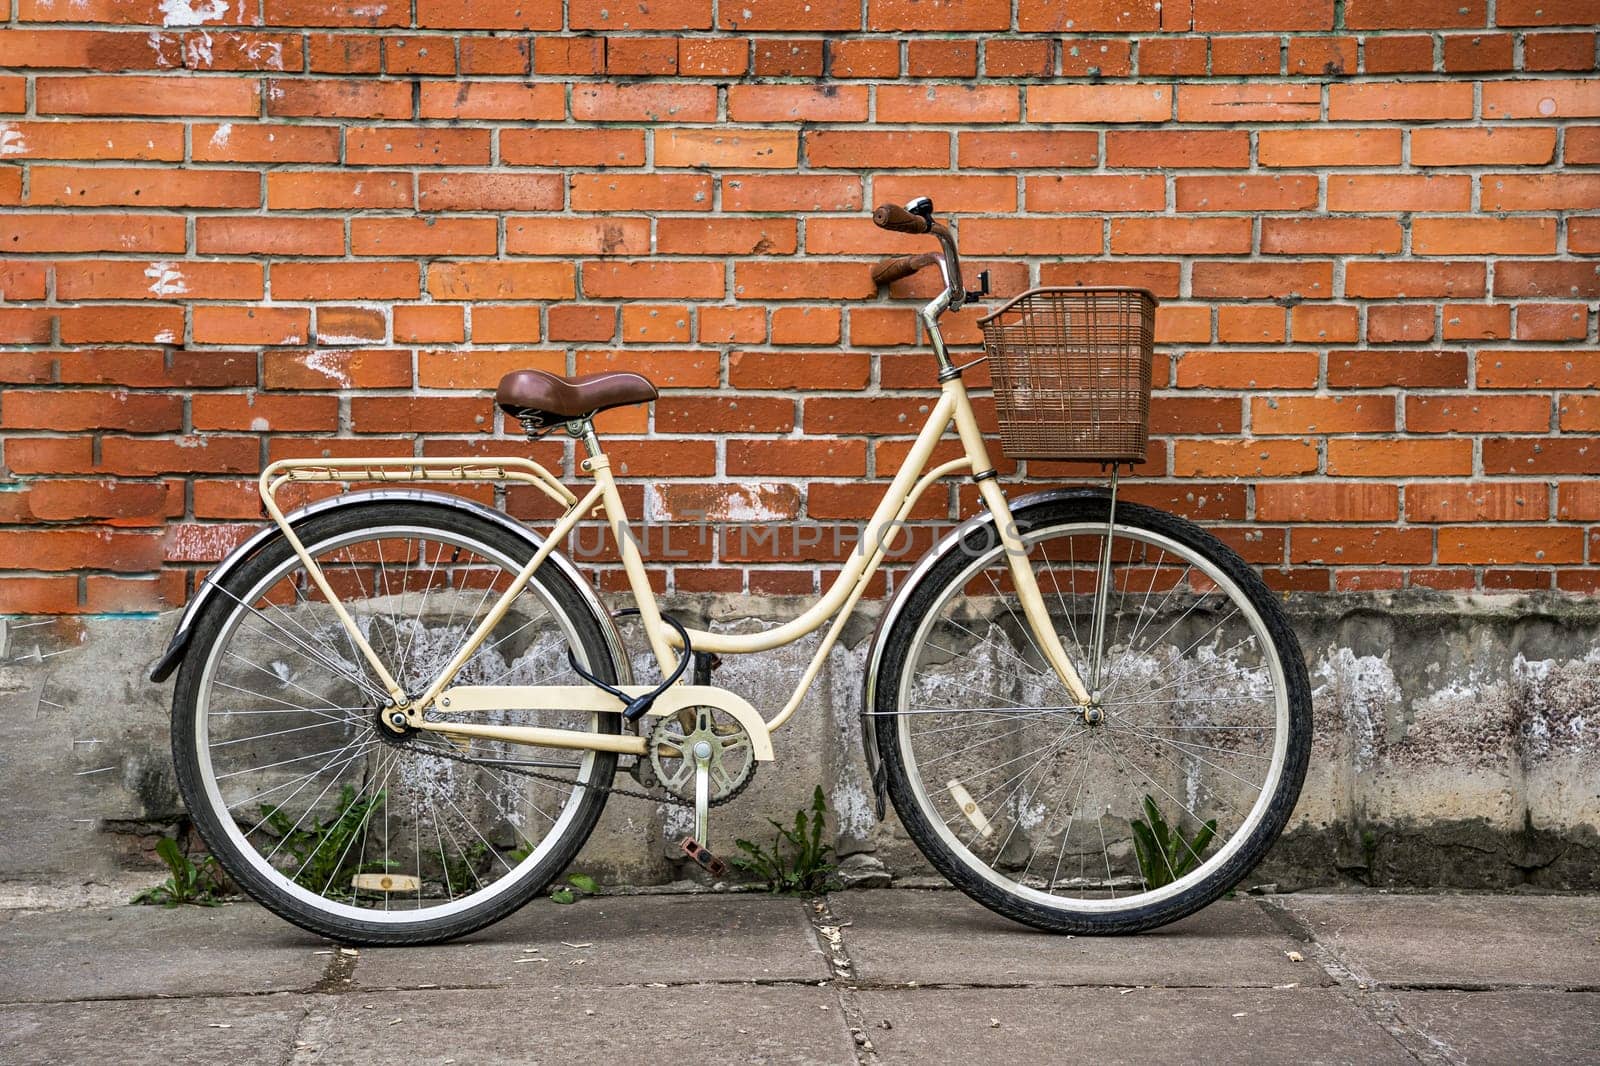 a lady's city bike with a basket leaning against the brick wall of the building. environmentally friendly transport. Vintage